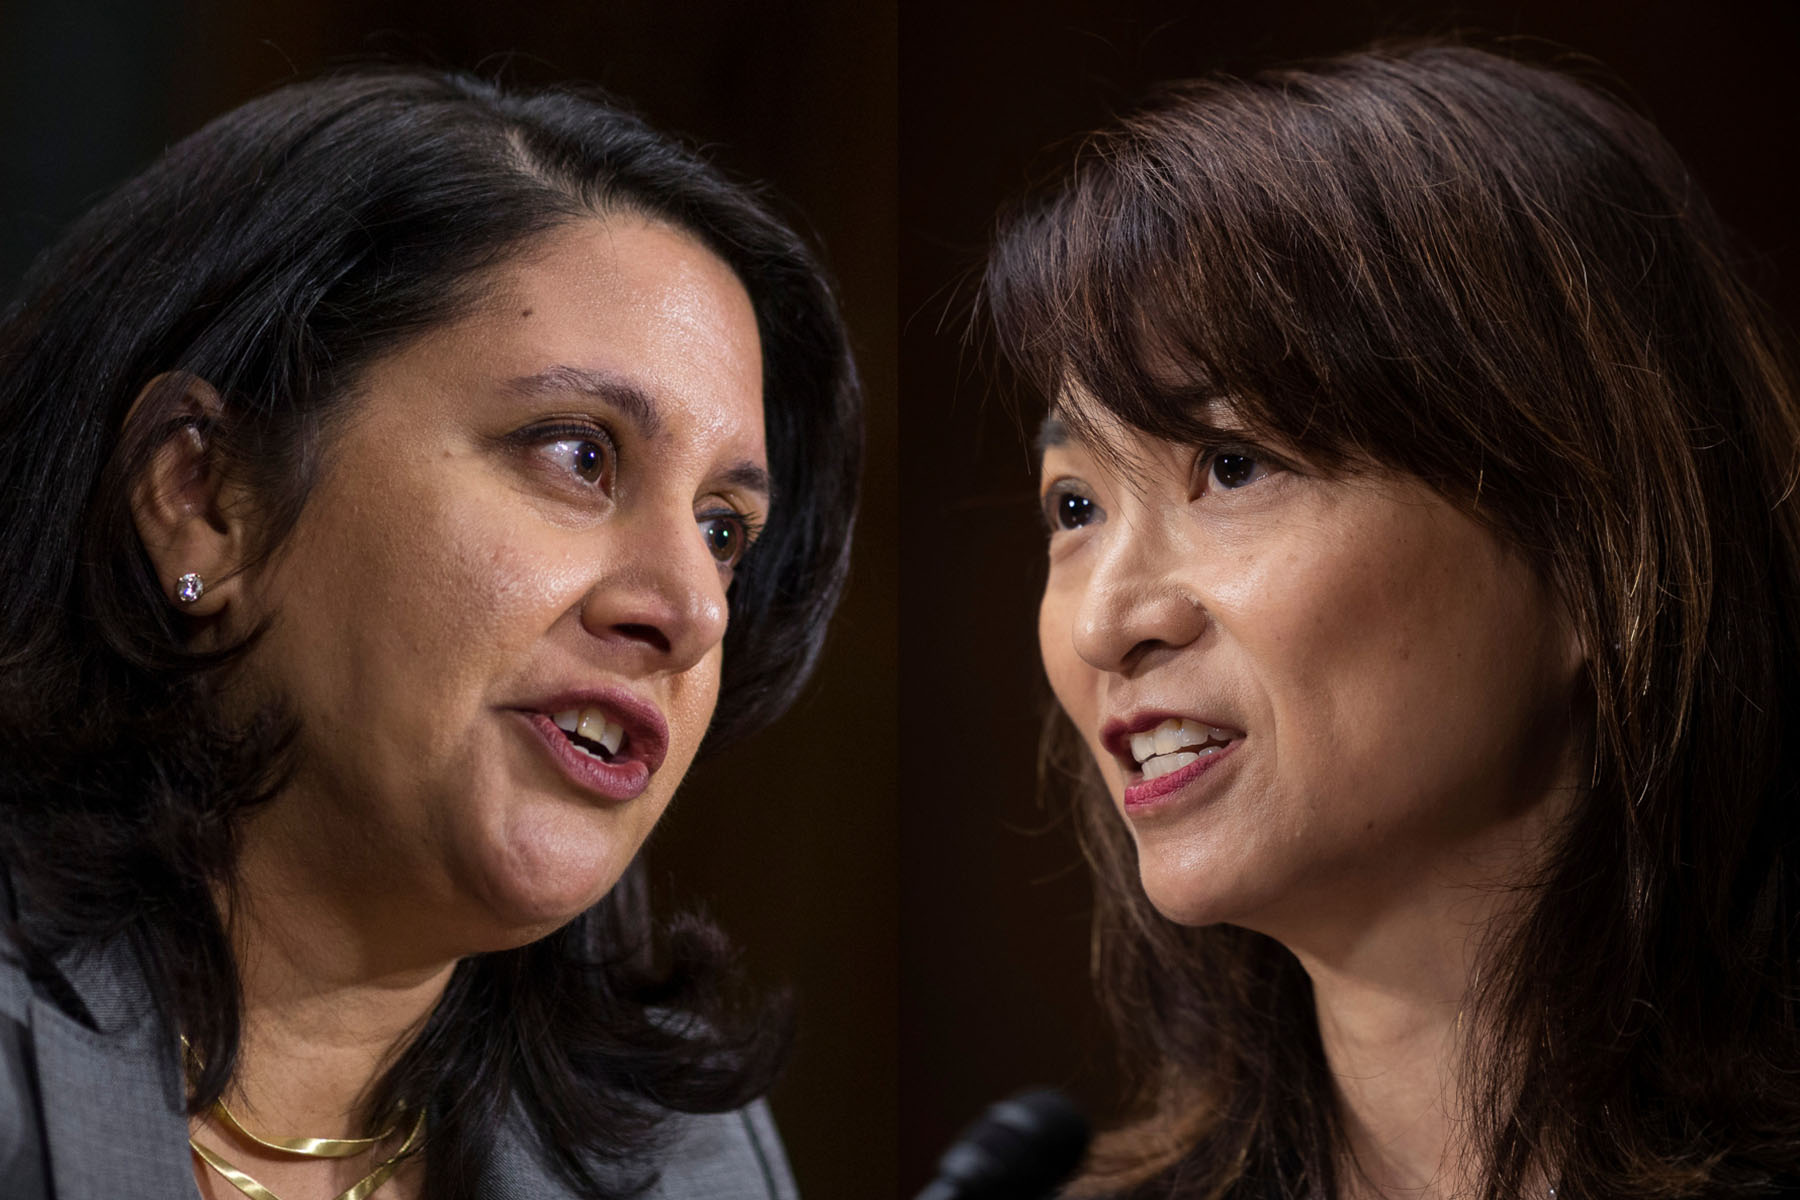 More AAPI women are becoming federal judges, but barriers remain